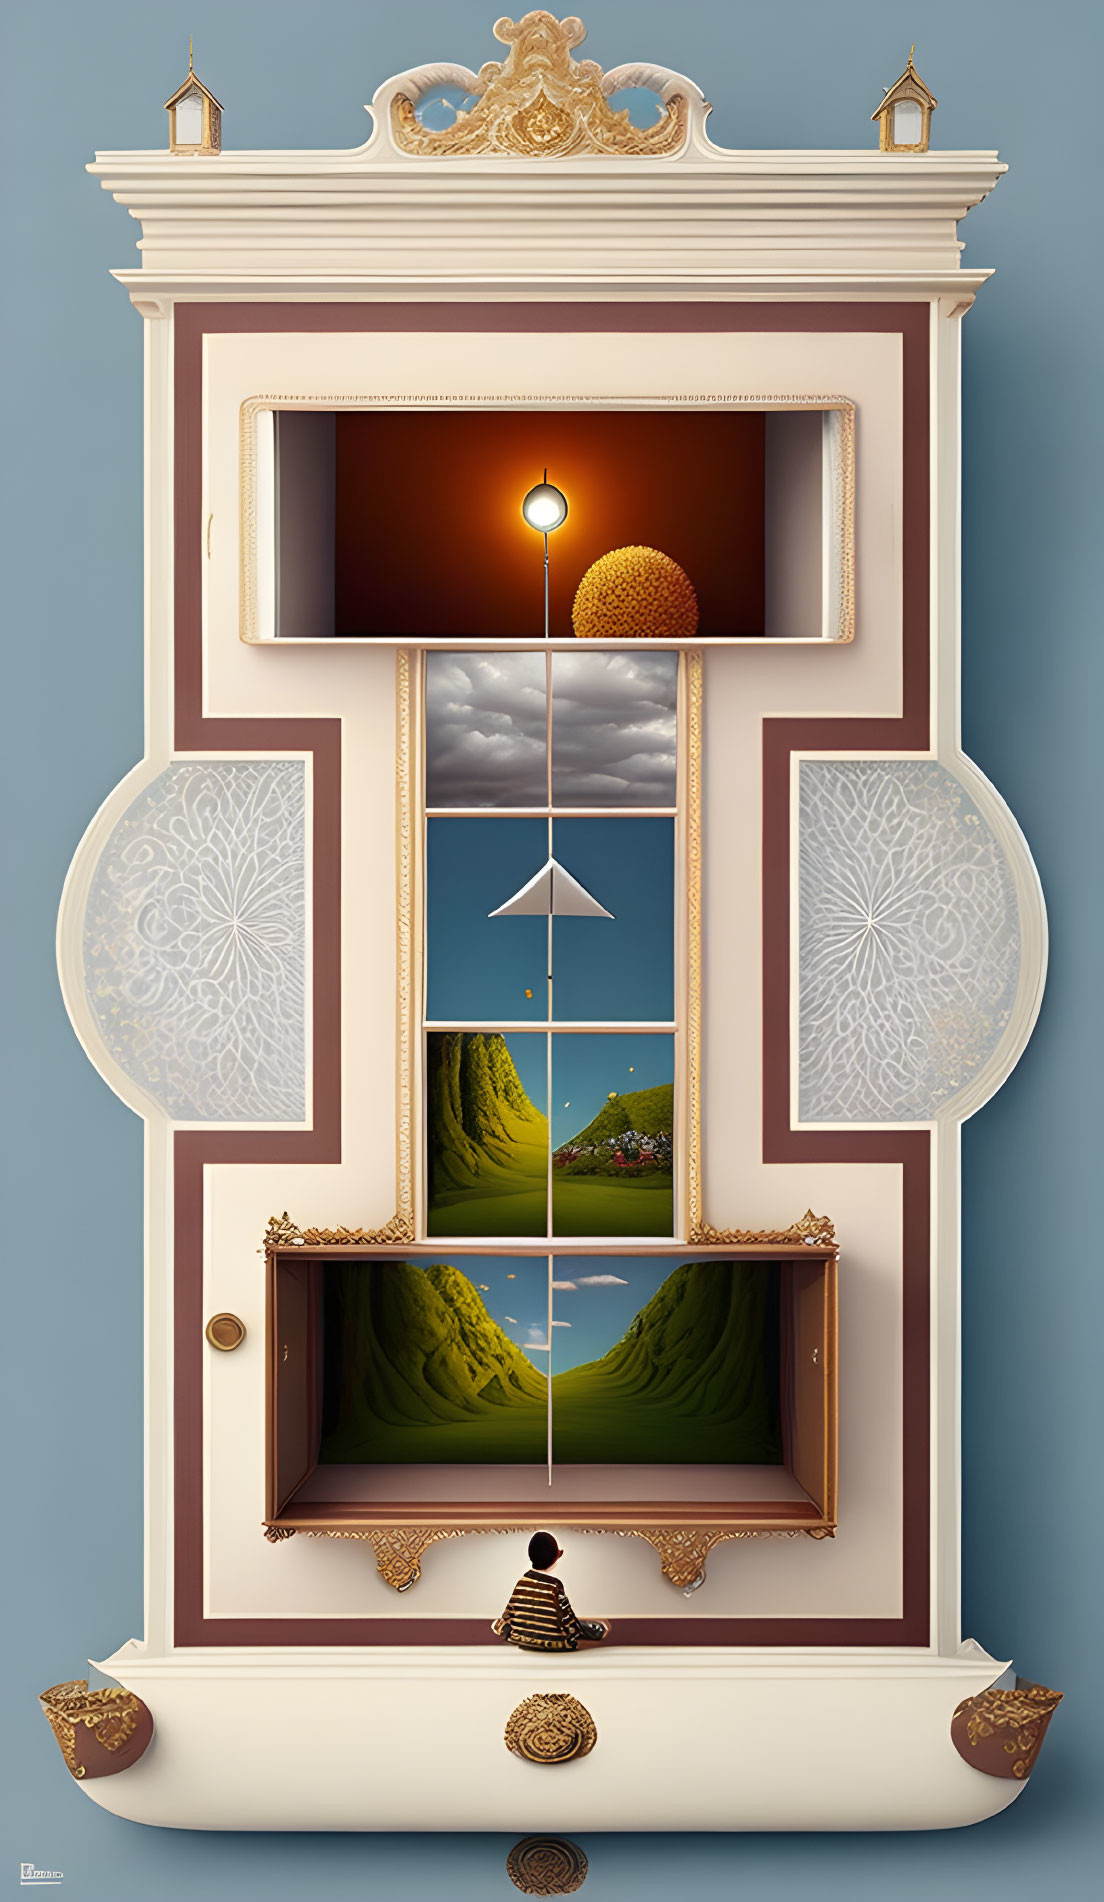 Surreal digital illustration of a grandfather clock with landscape faces and meditating figure